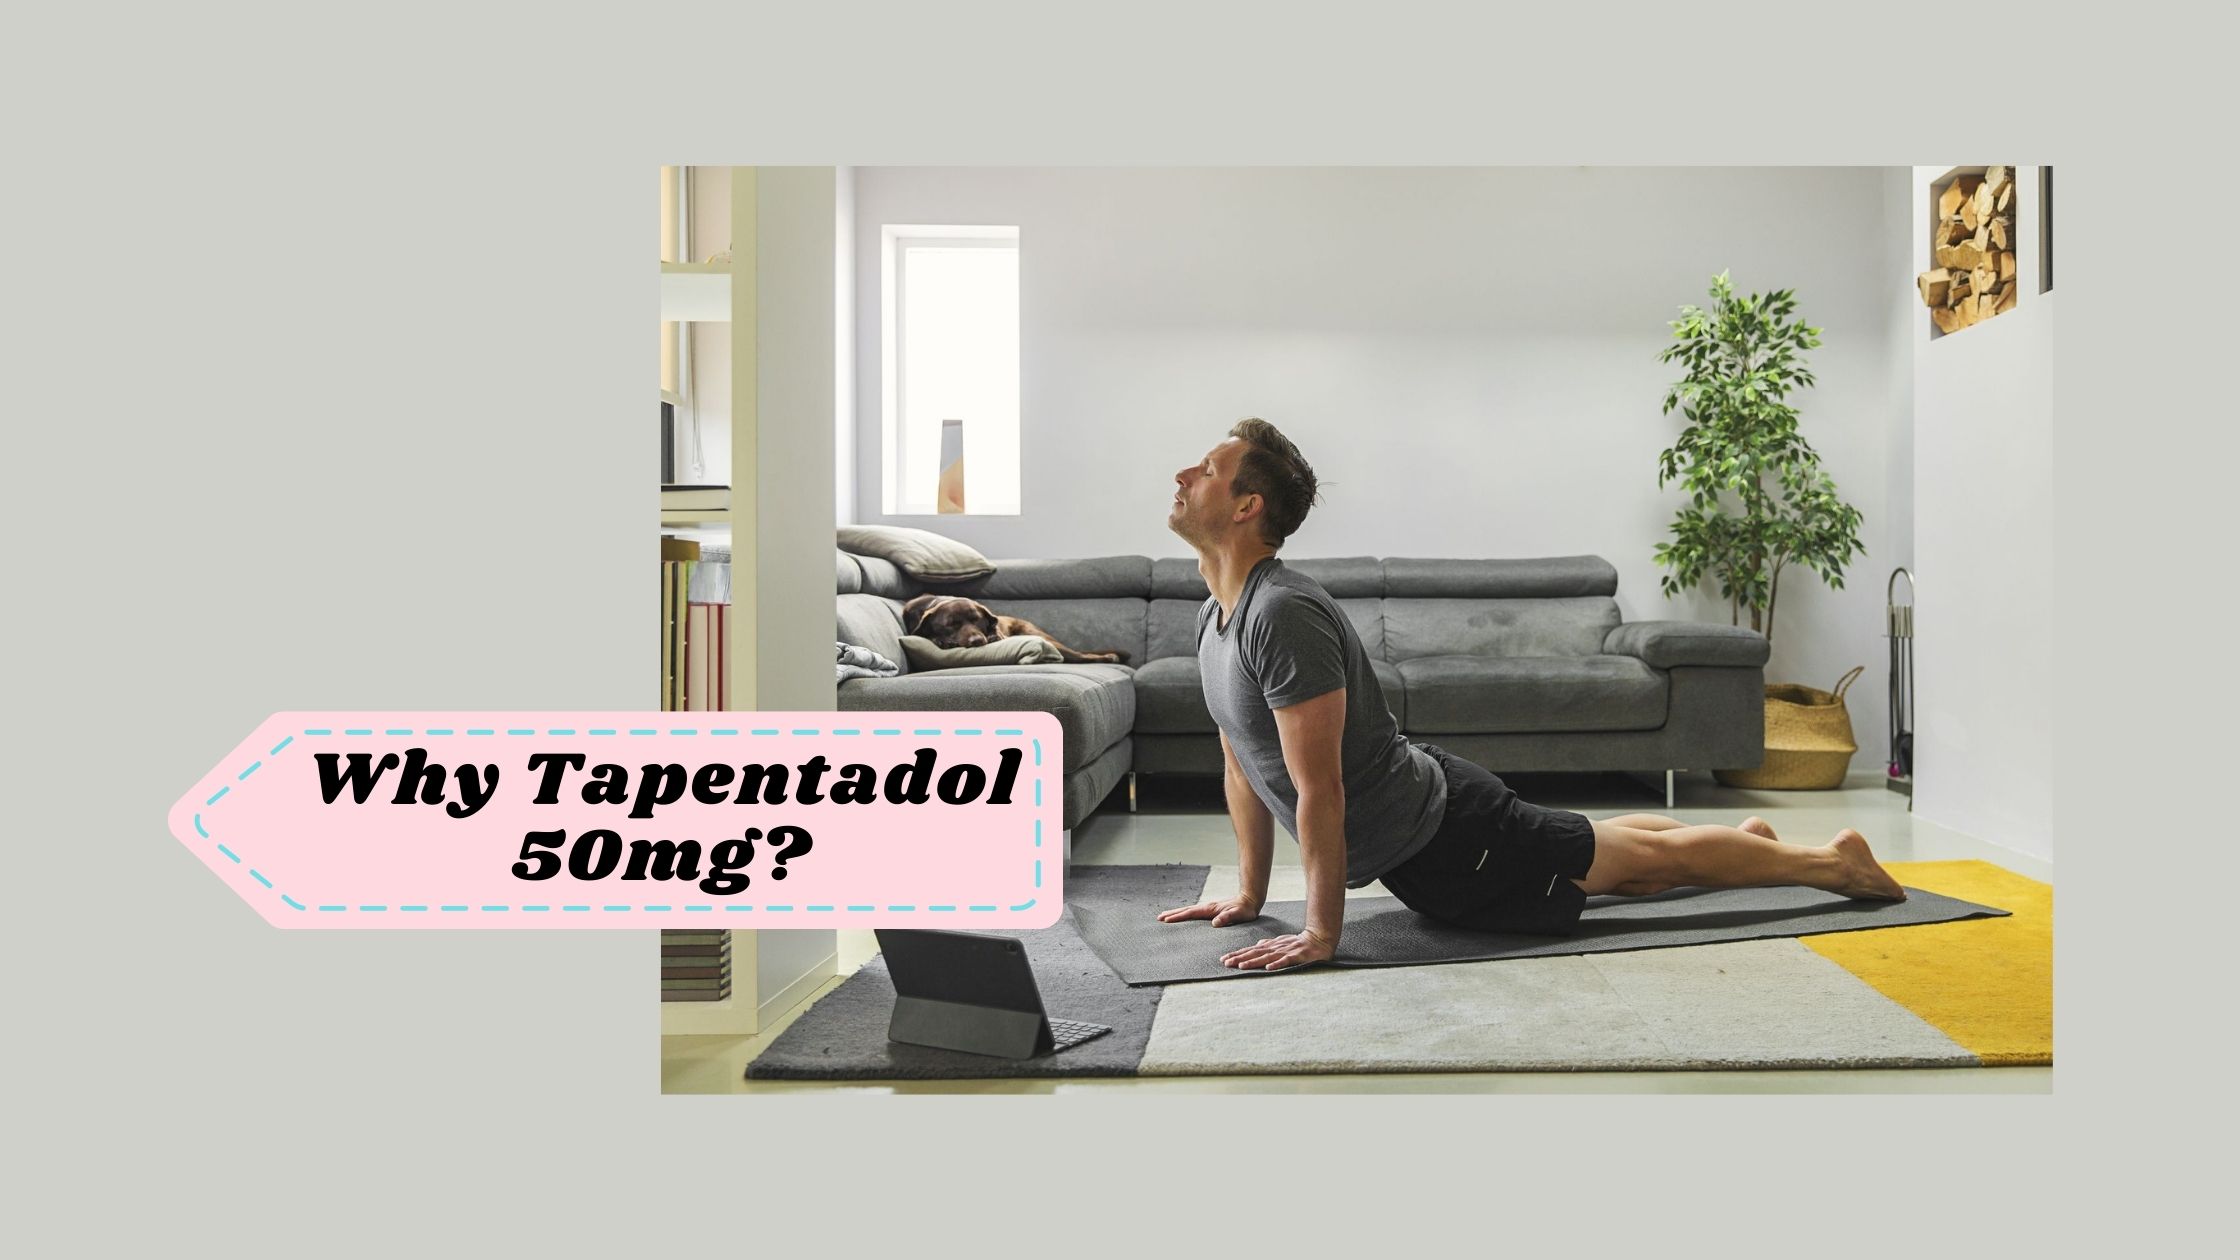 Why Tapentadol 50mg?